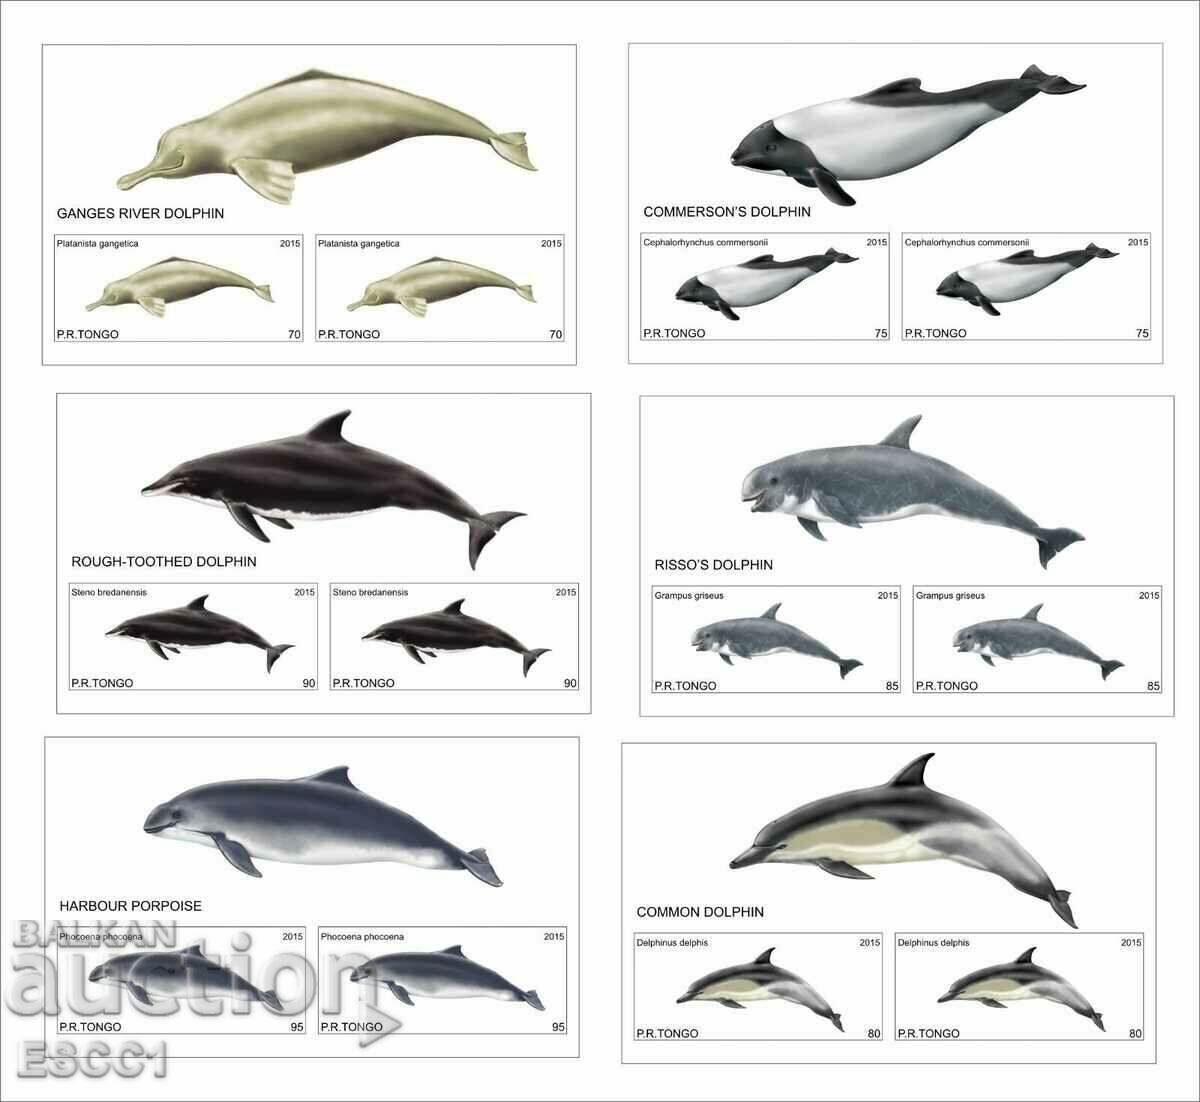 Clean Blocks Fauna Dolphins 2015 from Tongo